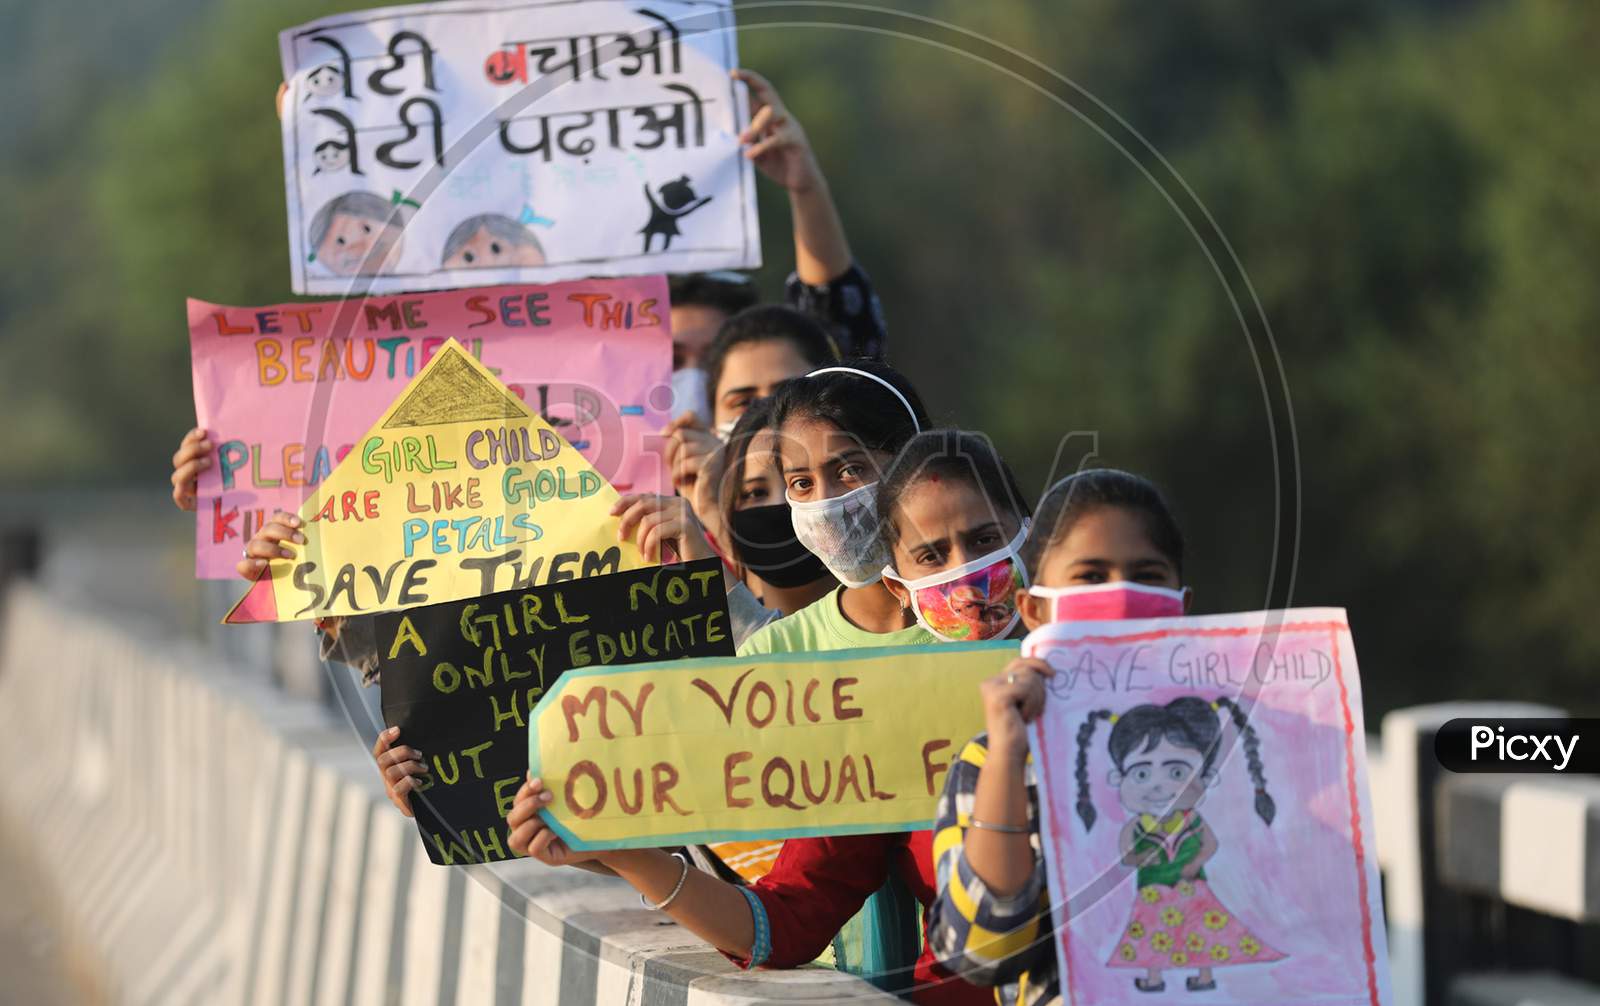 A Group of girls hold playcards ahead of International girls child day in Jammu ,10 october.2020.